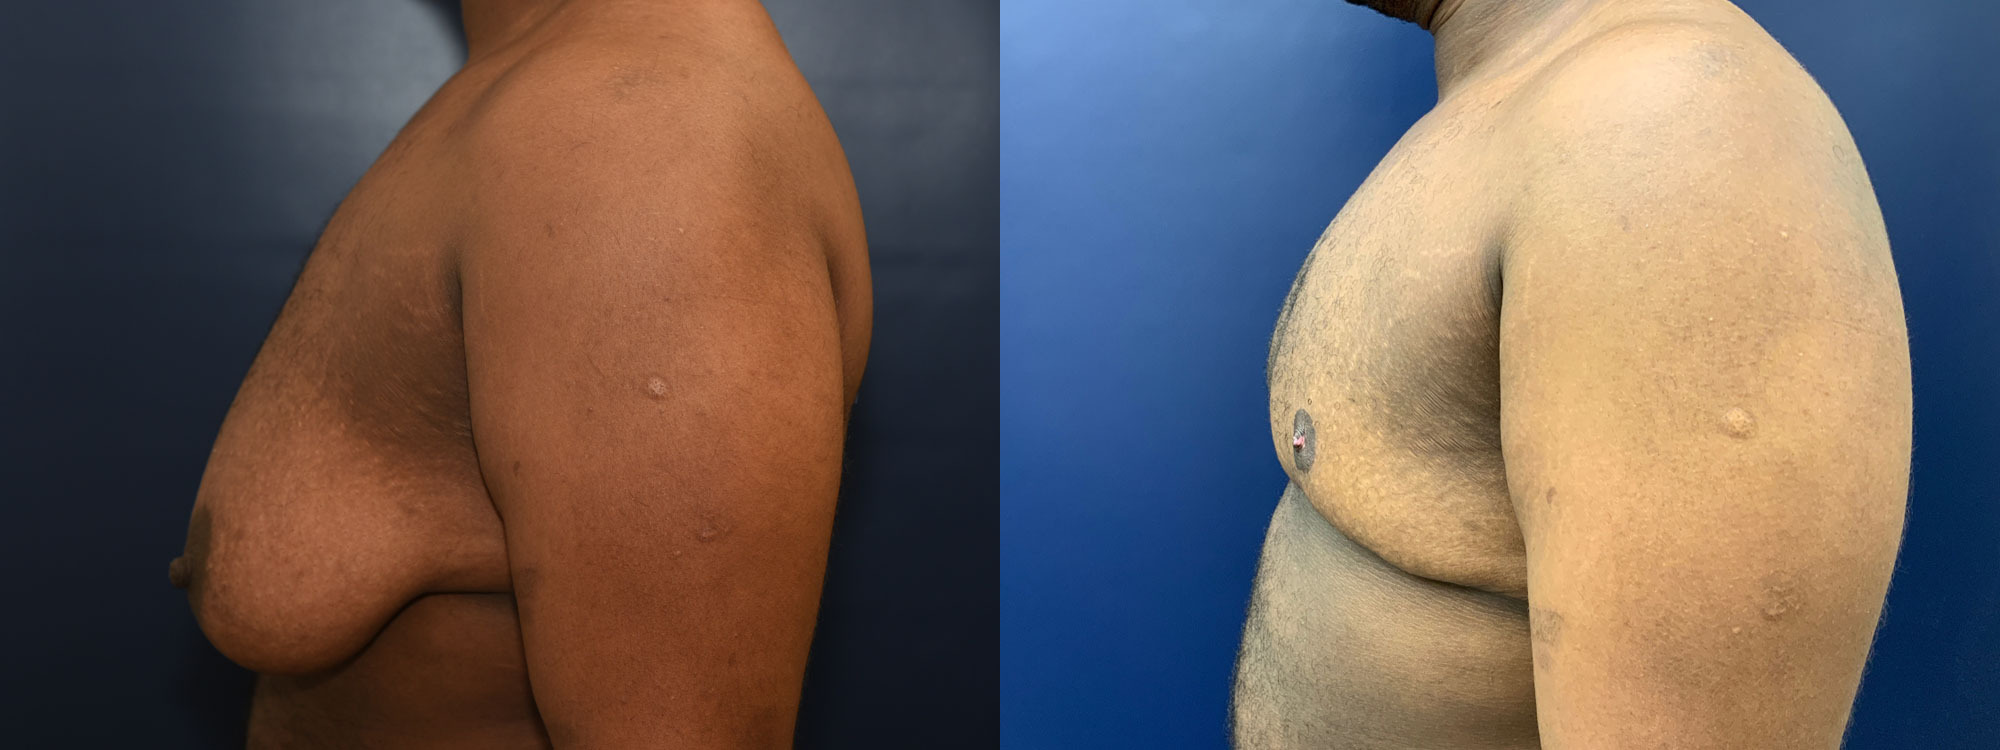 Female to Male Top Surgery Before and After Photo by Dr. Butler in Pensacola Florida